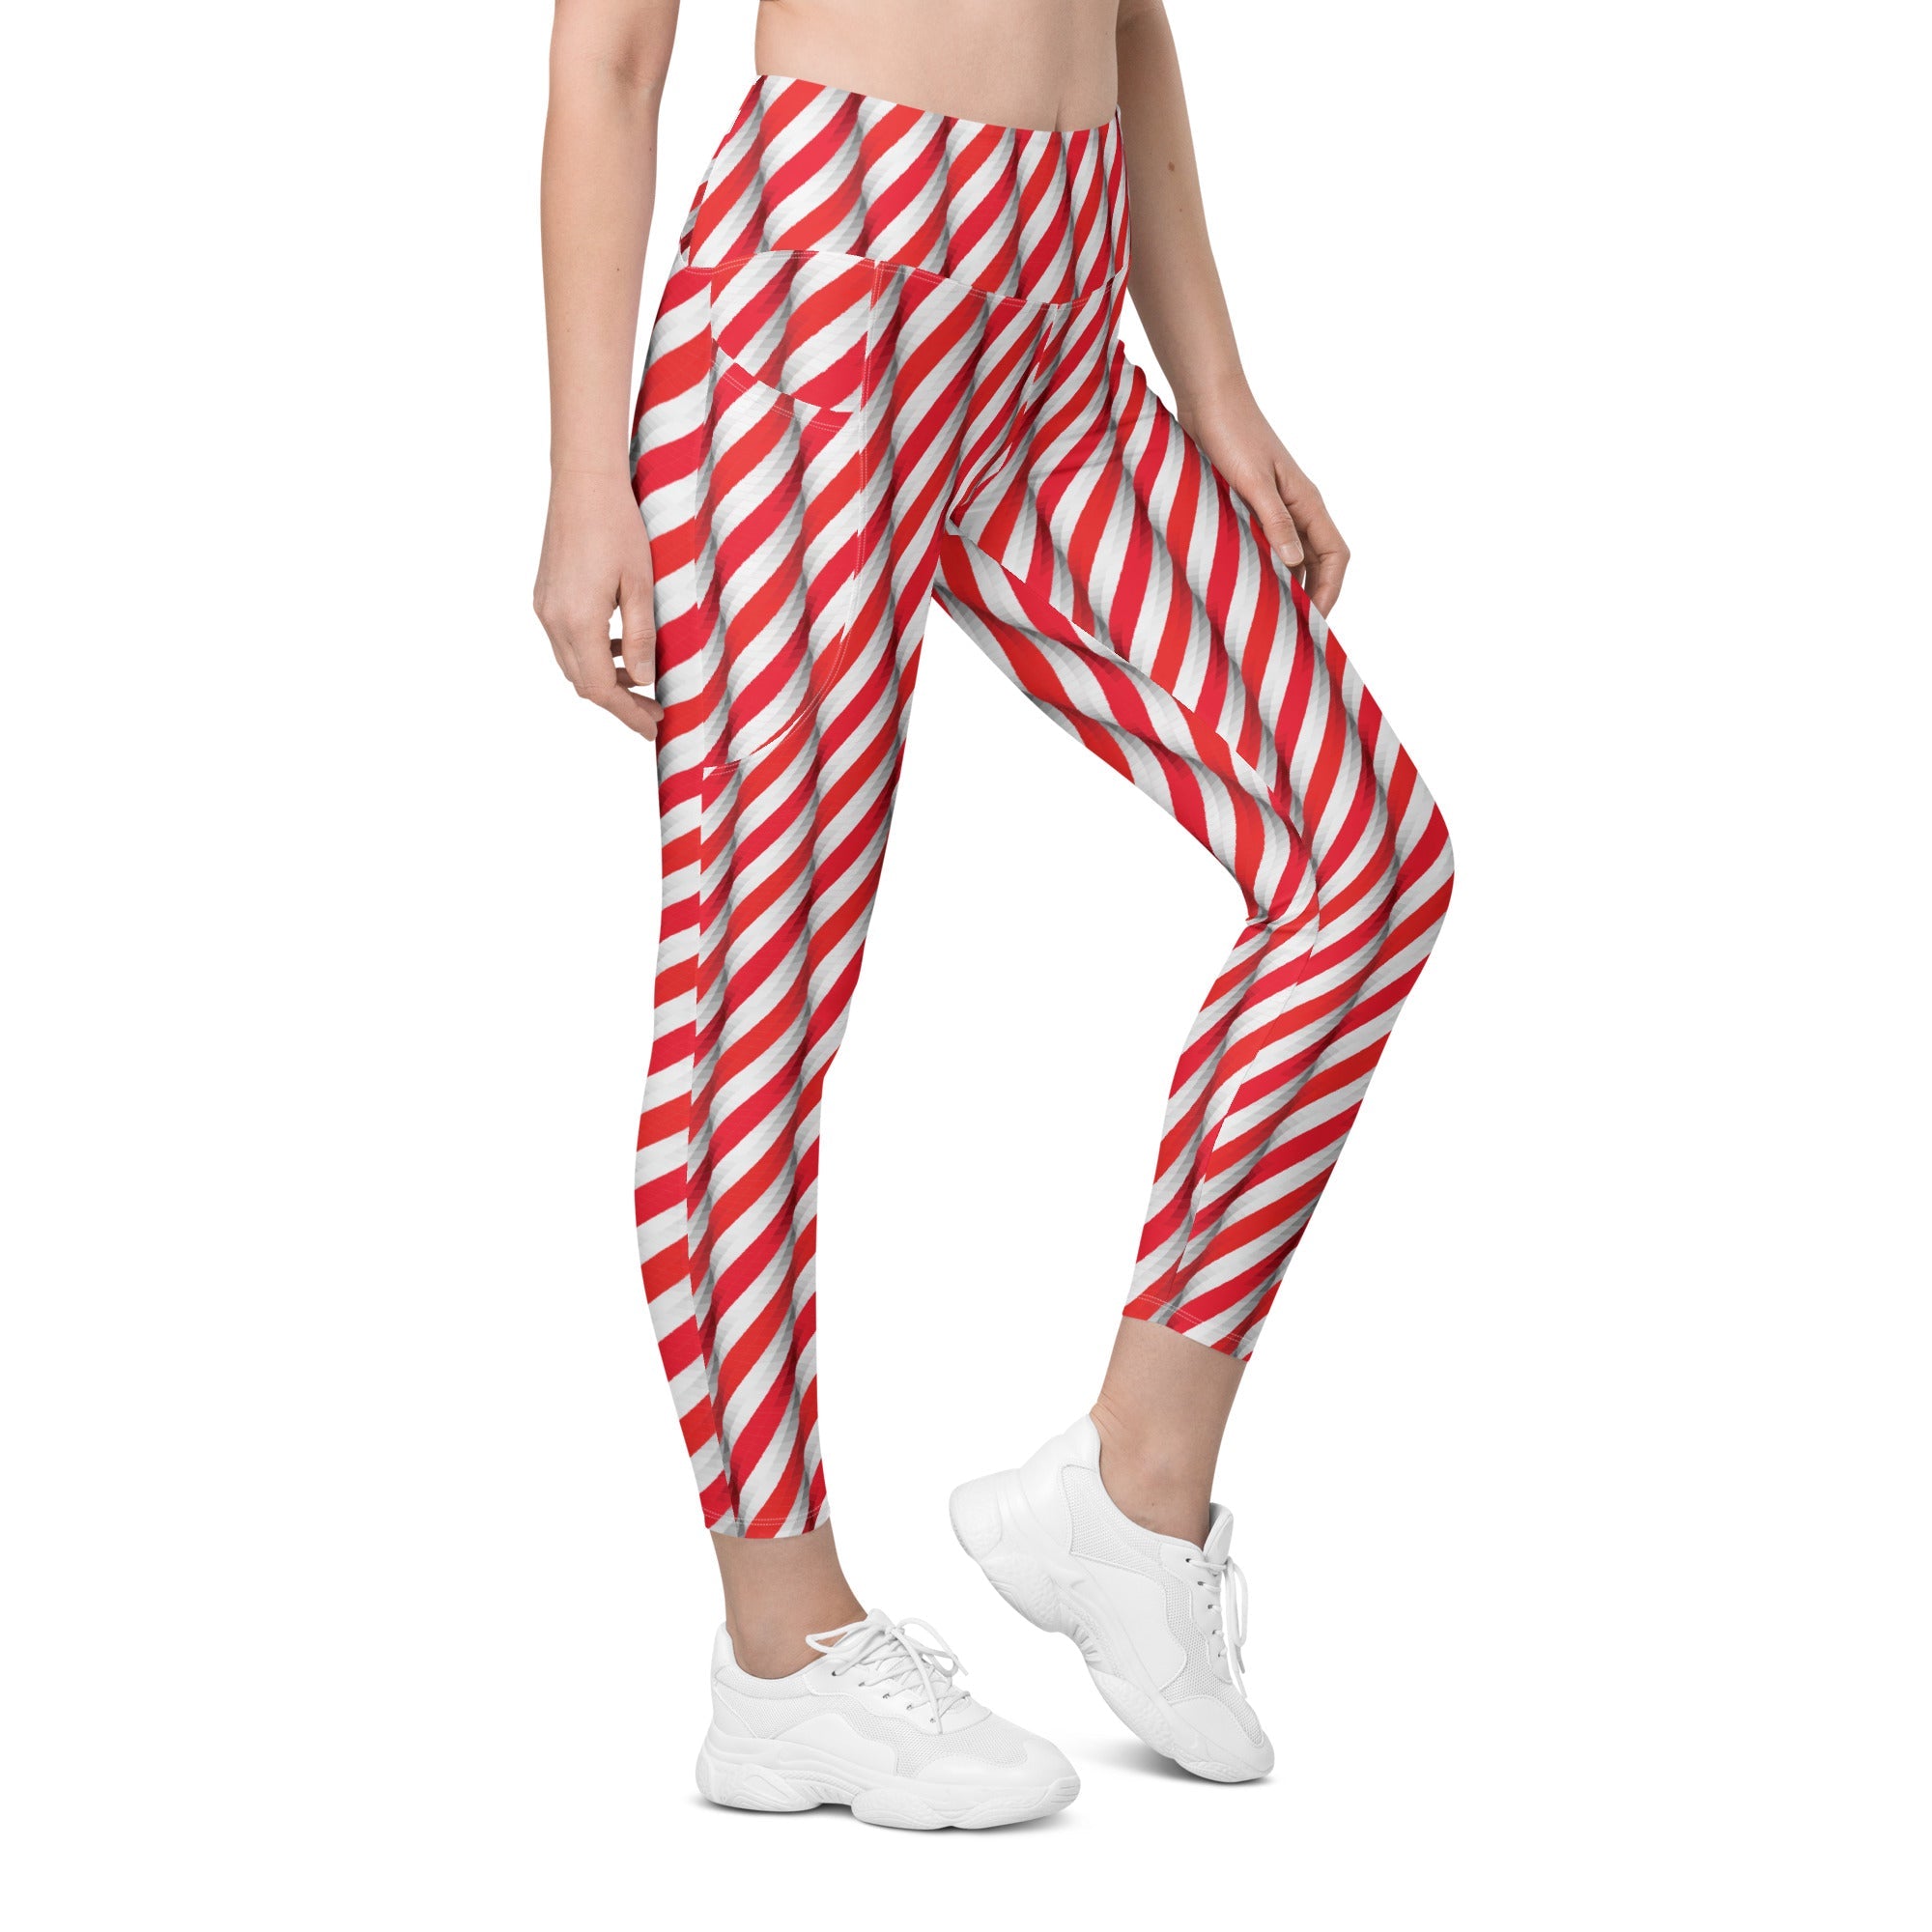 Real Candy Cane Leggings With Pockets